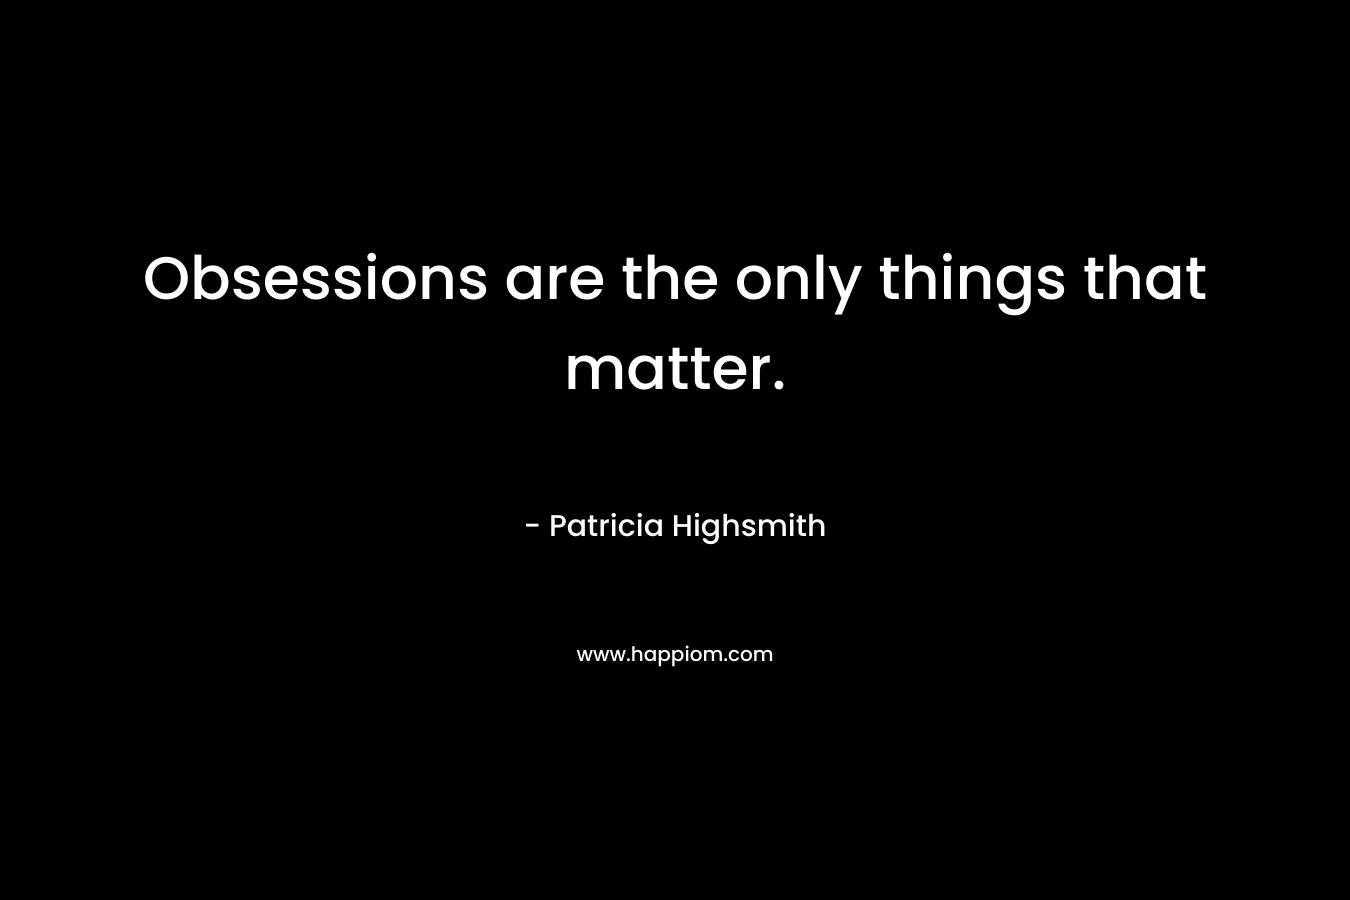 Obsessions are the only things that matter. – Patricia Highsmith